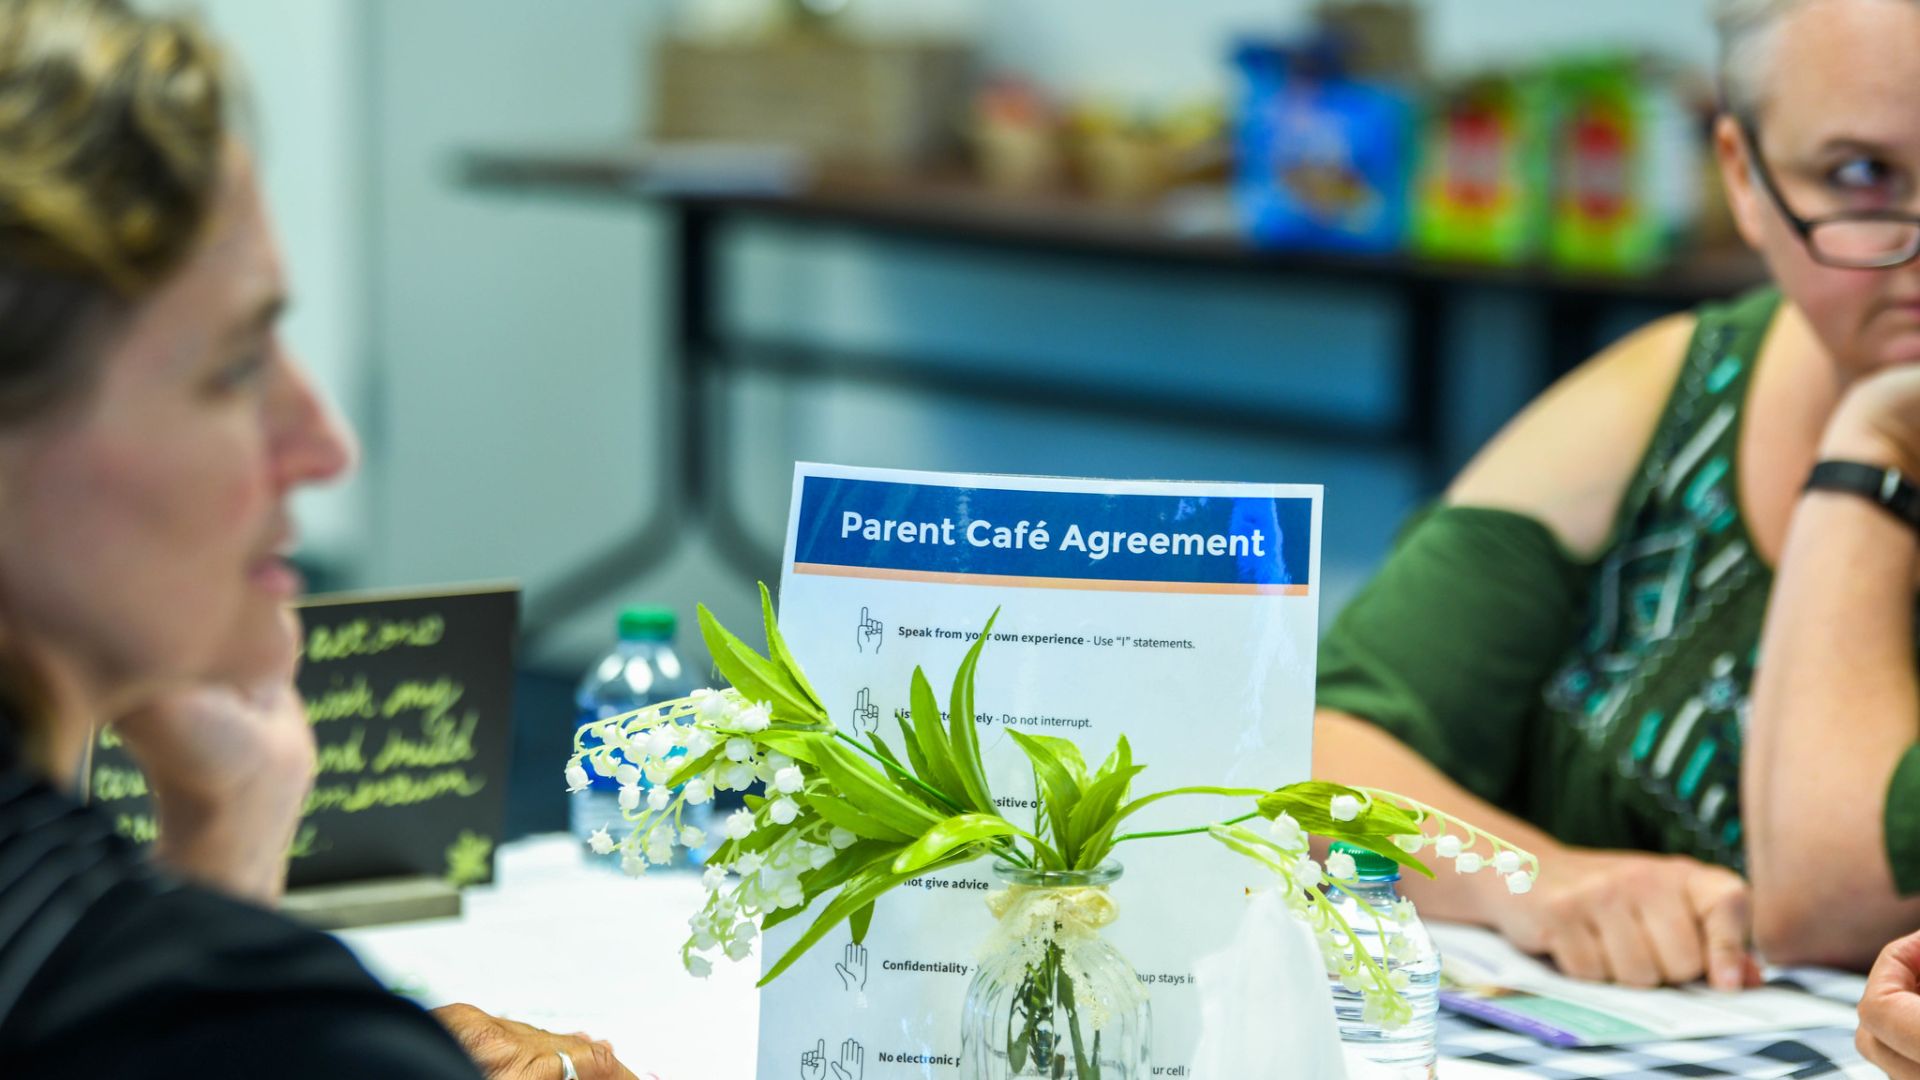 A close up picture of the “Parent Café Agreement” that is a centerpiece at our Café events with two females at the table engaged in conversation.